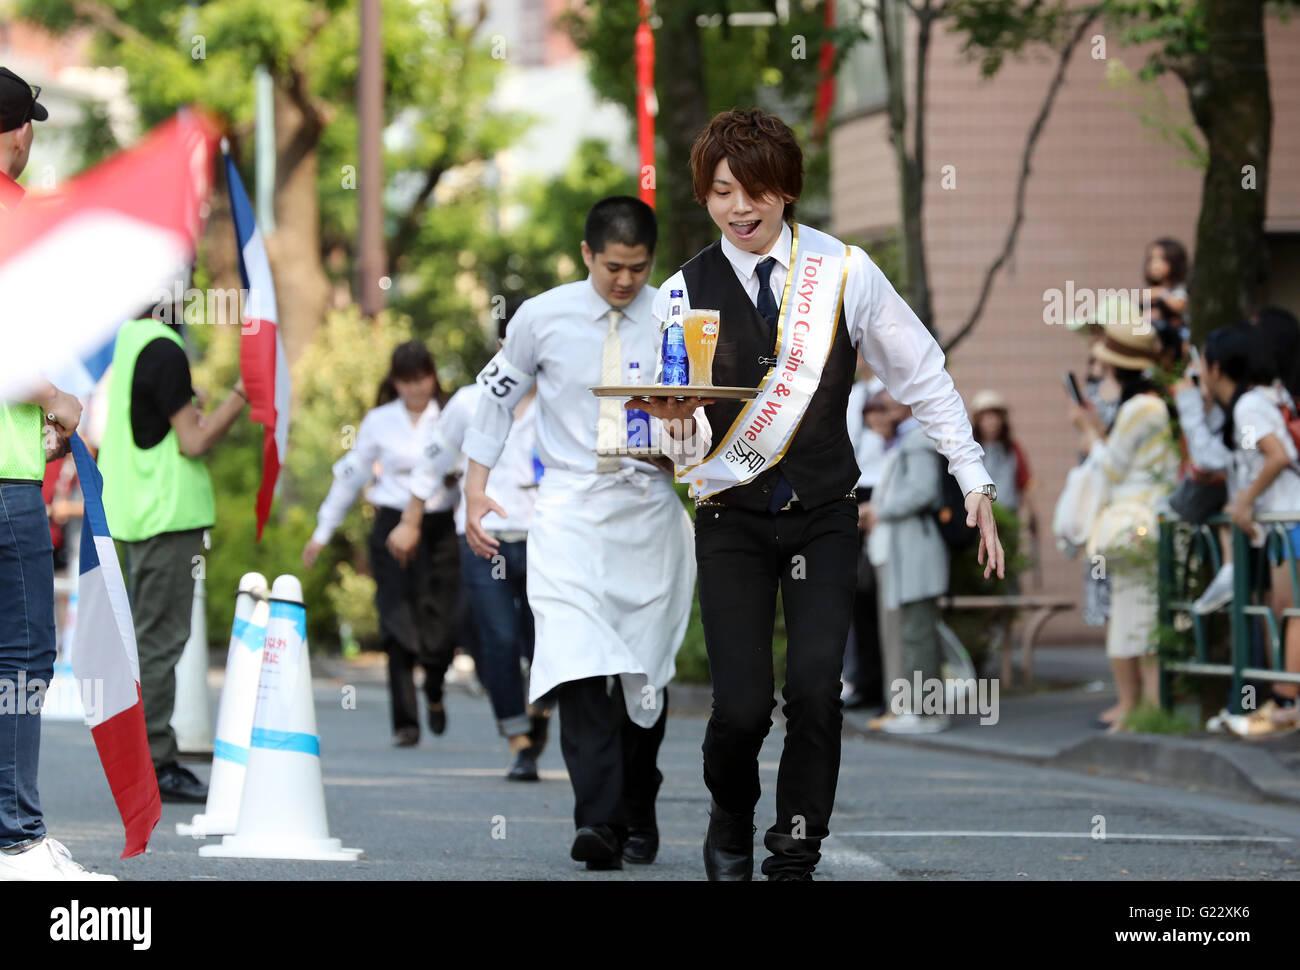 Tokyo, Japan. 22nd May, 2016. Waiters carry glasses of beer on the trays during the 'garcon carry race' in Tokyo on Sunday, May 22, 2016 as a part of 'Aperitif 365' event. 46 contestants from restaurants and cafes participated the beer carry race vying for the first prize of 300,000 yen, sponsored by French beer Kronenbourg. © Yoshio Tsunoda/AFLO/Alamy Live News Stock Photo